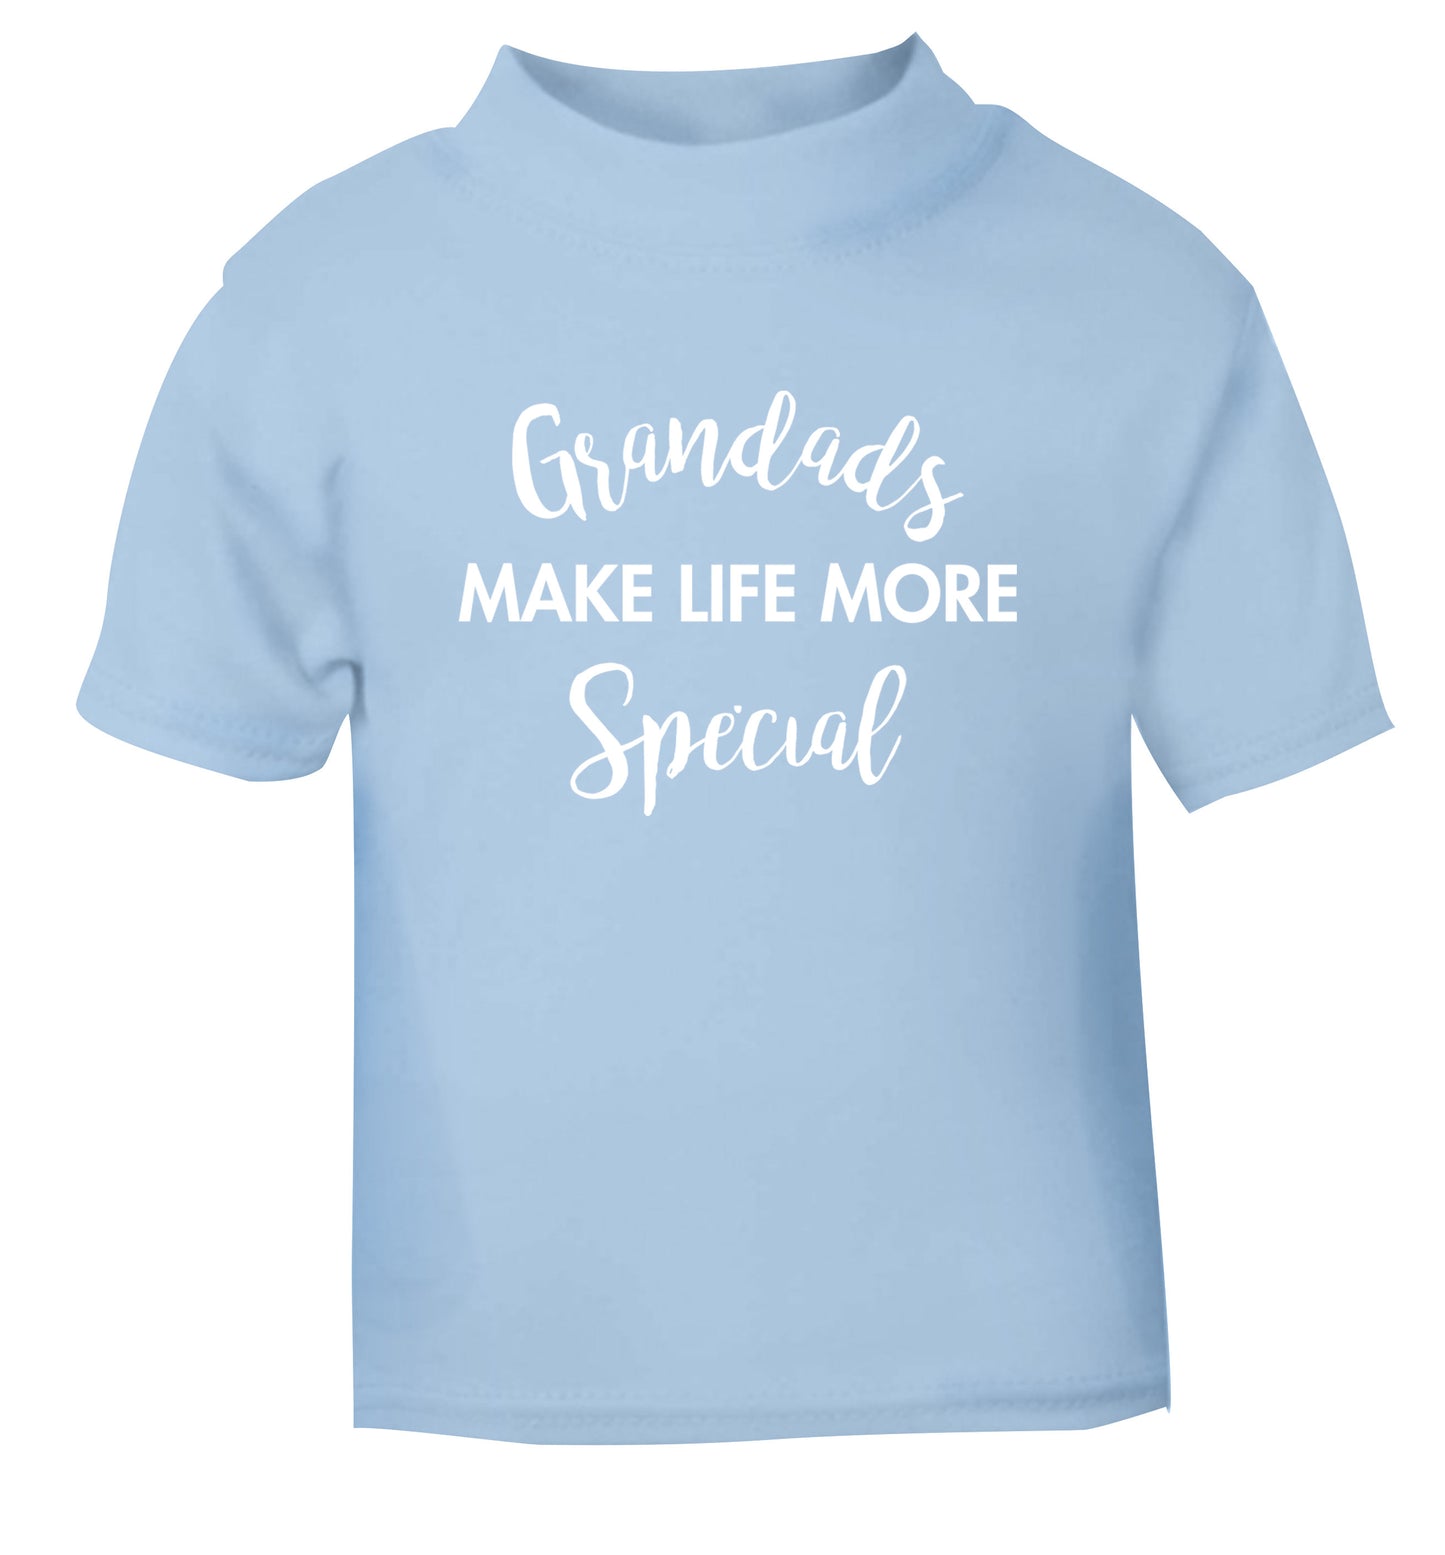 Grandads make life more special light blue Baby Toddler Tshirt 2 Years